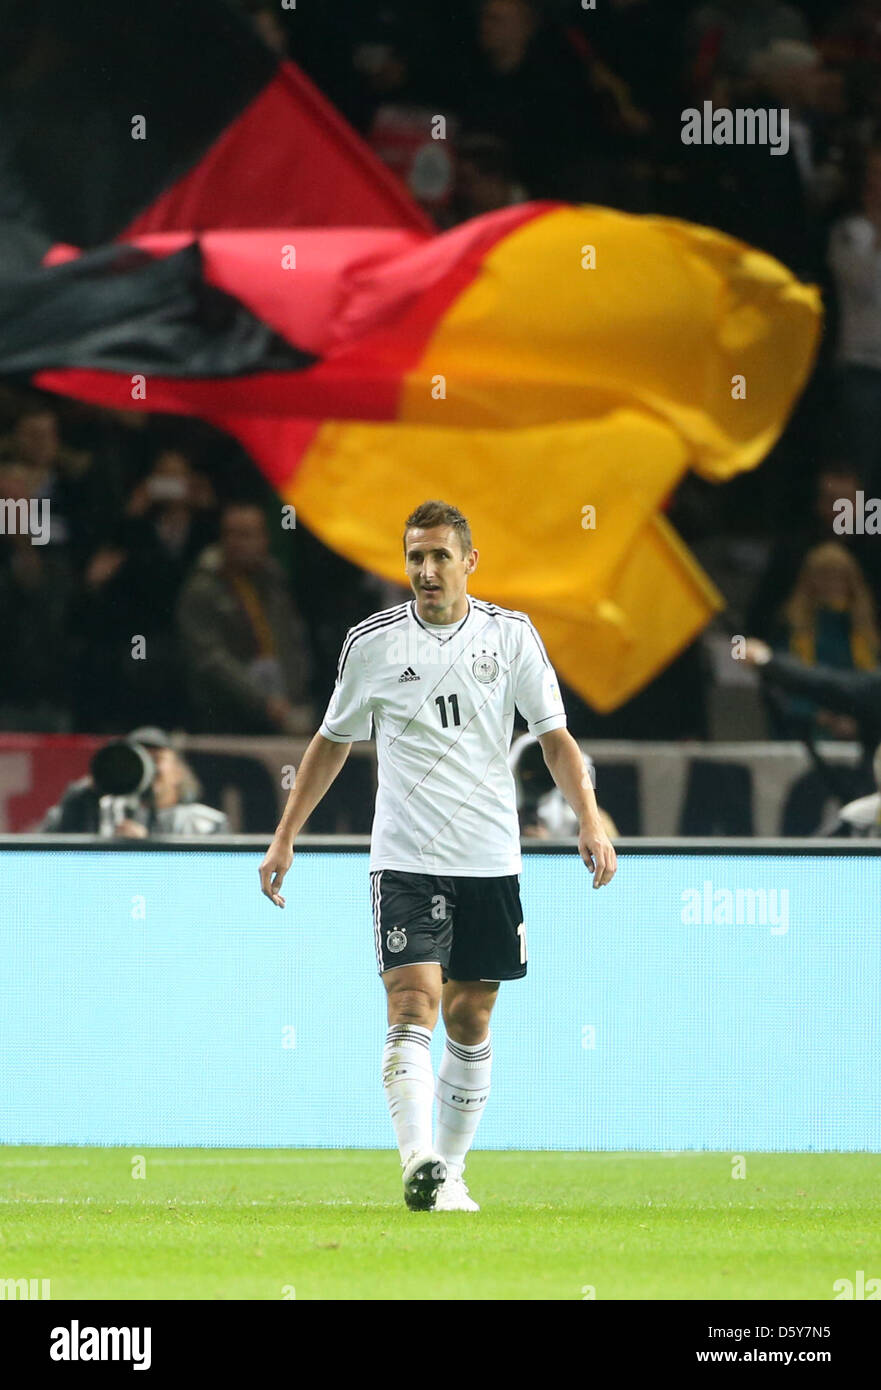 Germany's Miroslav Klose after scoring the first goal during the FIFA World Cup 2014 qualifying soccer match between Germany and Sweden at Olympic stadium in Berlin, Germany, 16 October 2012. Photo: Kay Nietfeld/dpa  +++(c) dpa - Bildfunk+++ Stock Photo